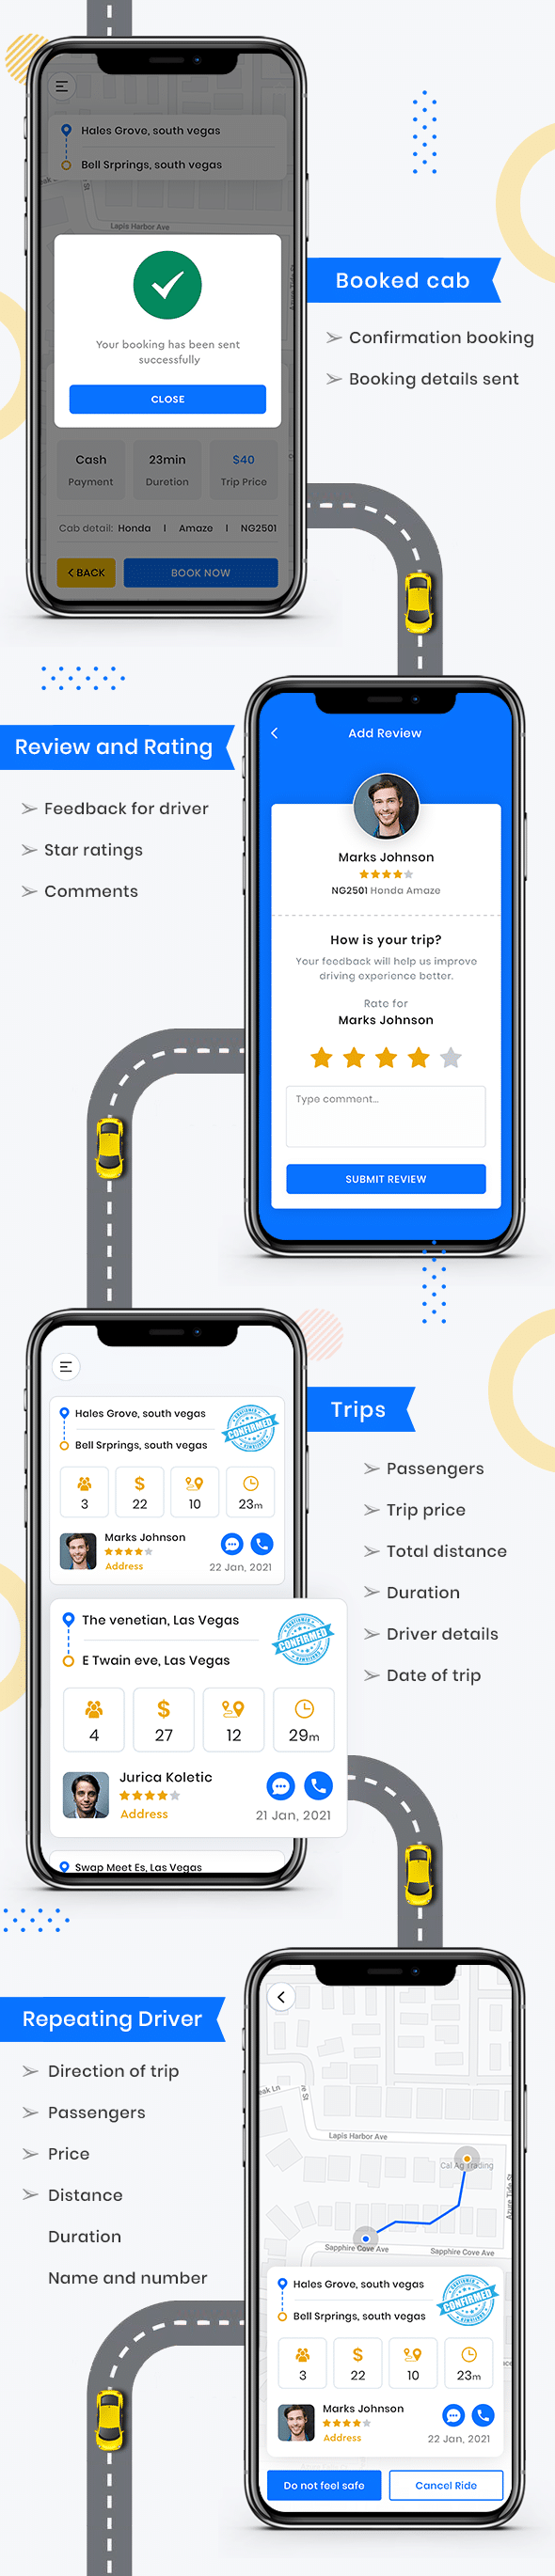 CabME - Flutter Complete Taxi Booking Solution - 6